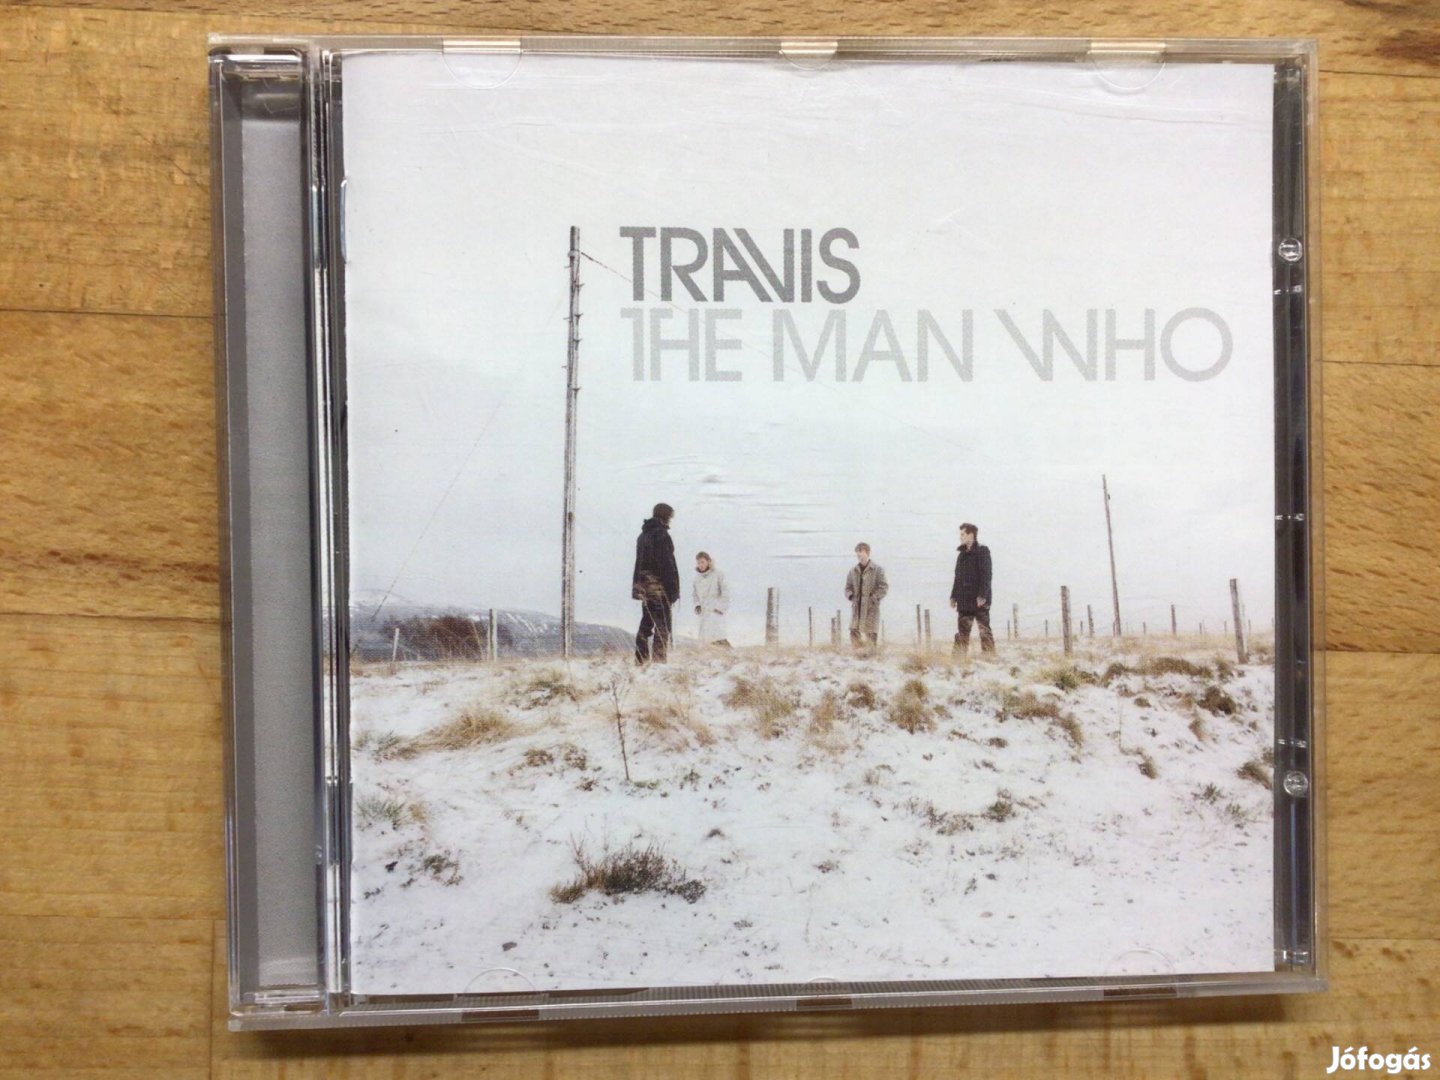 Travis- The Man Who